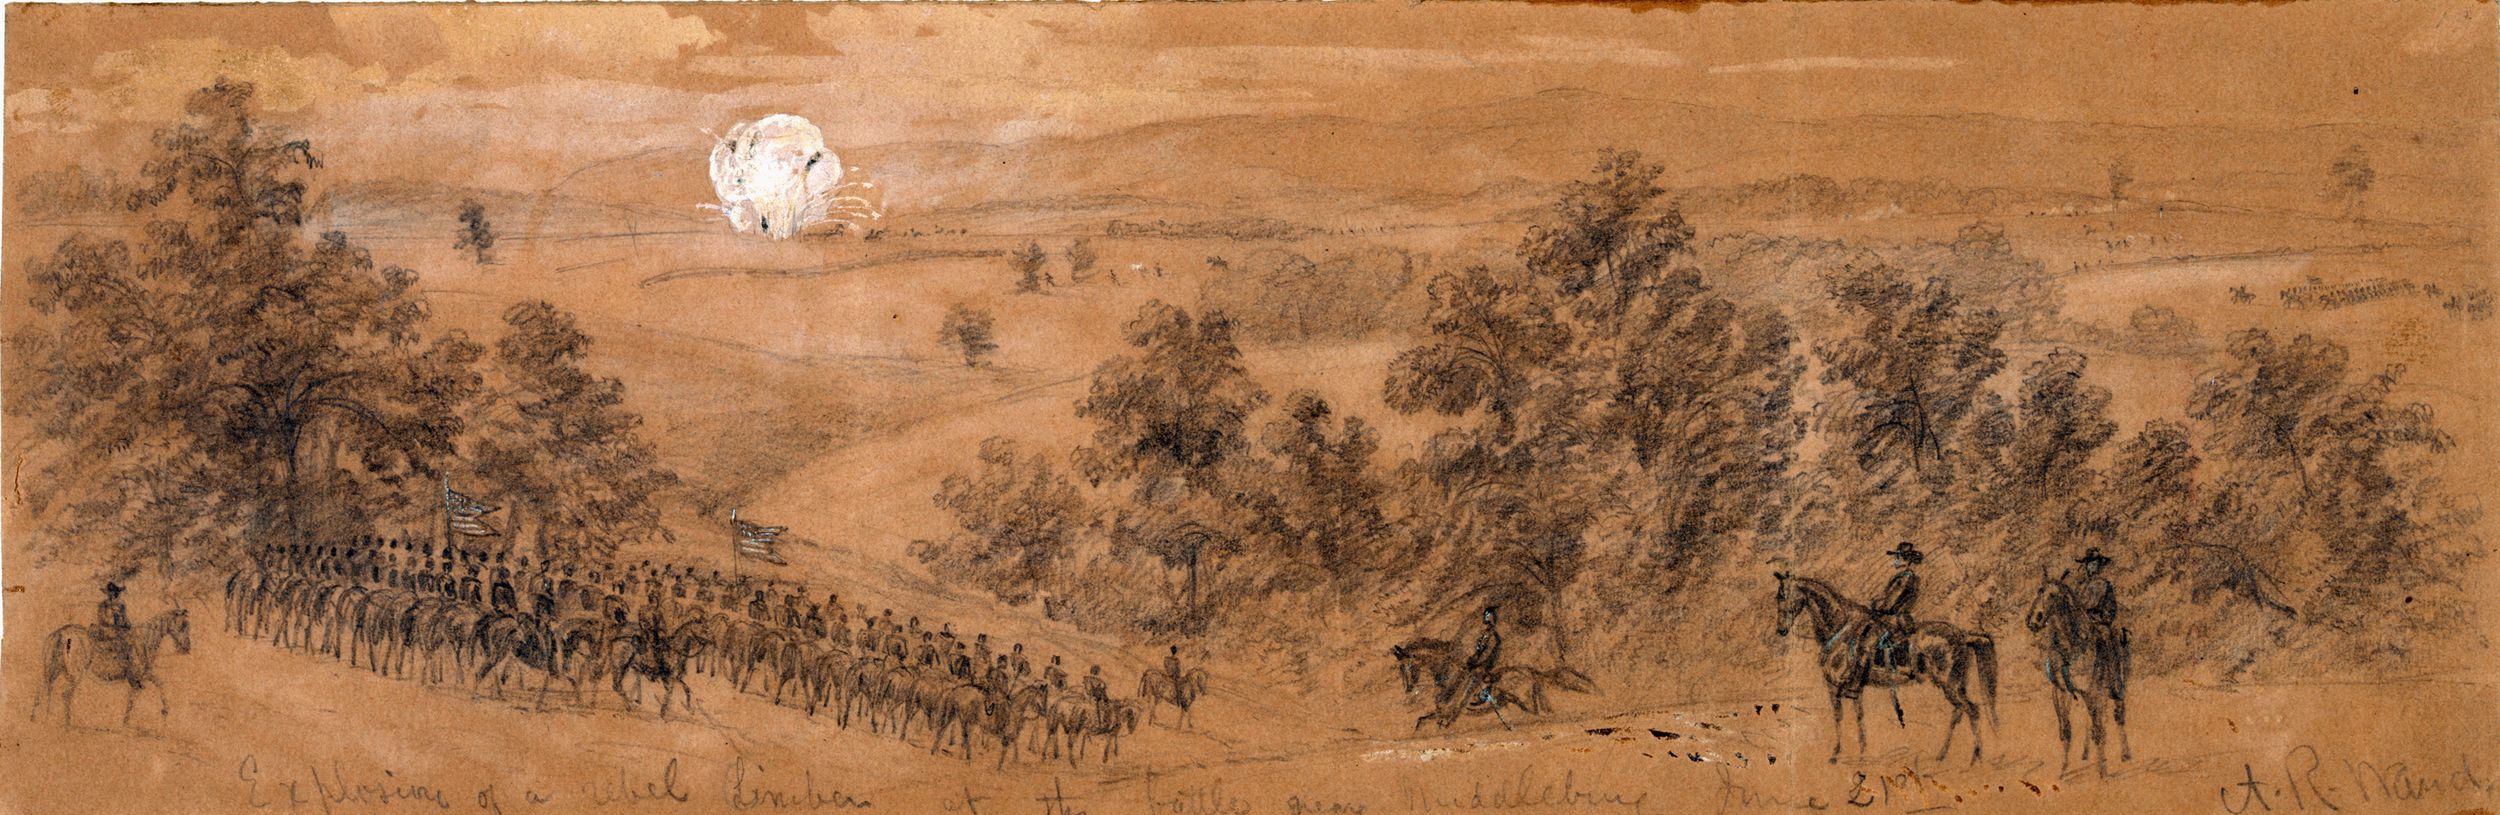 Union cavalry assembles near Middleburg, Virginia, in June 1863. Duffie’s unsupported command was nearly wiped out, reduced to “gallant debris” by the Confederates.